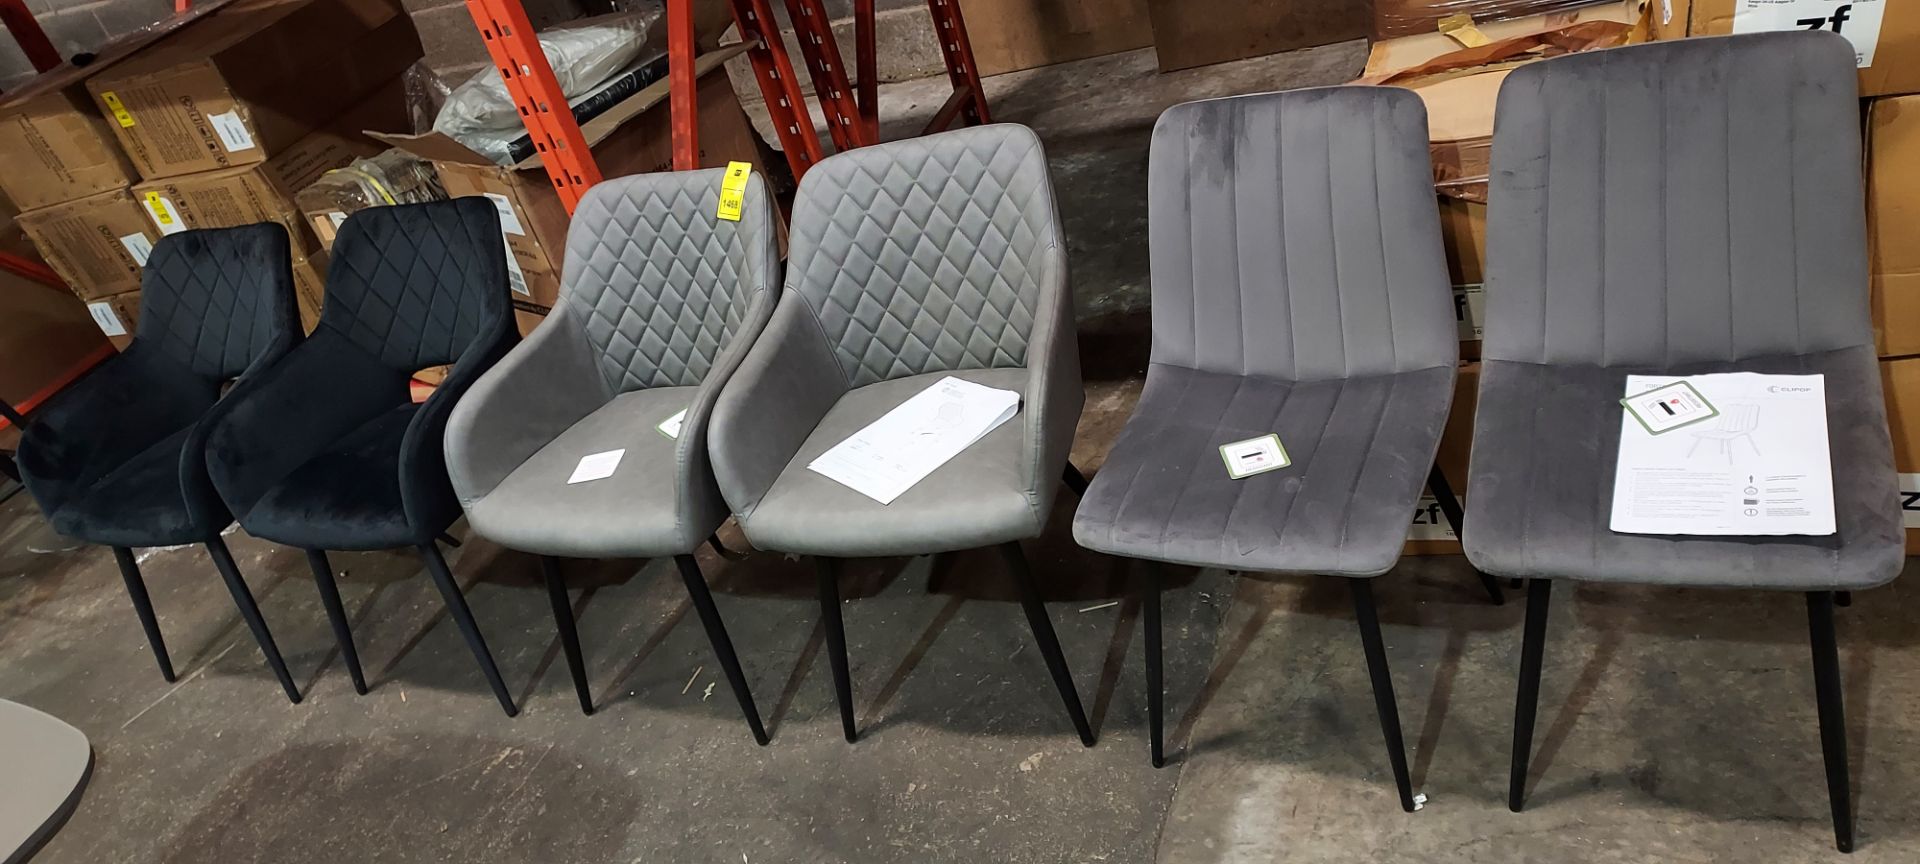 3 X SET OF 2 BRAND NEW DINING CHAIRS IN VARIOUS STYLES IN GREY VELVET- GREY LEATHER LOOK / NAVY BLUE